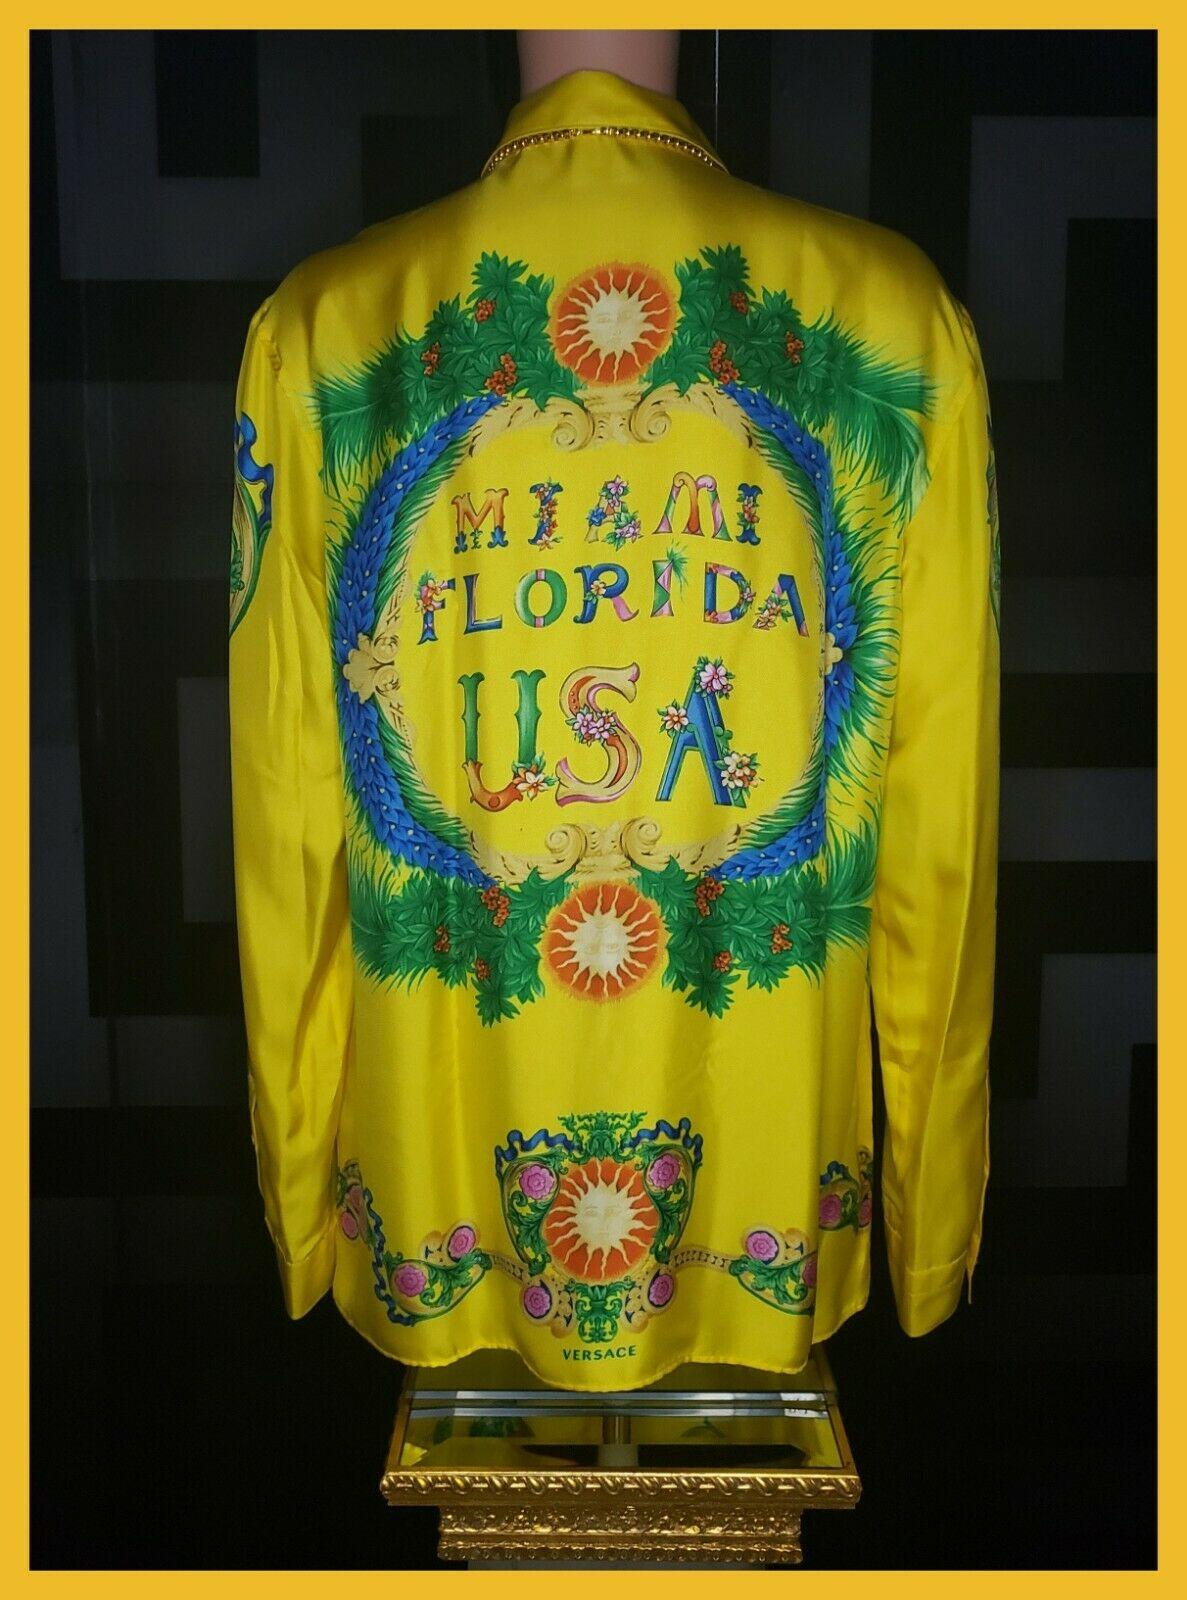 SOLD OUT!!! MIAMI FLORIDA USA VERSACE SILK SHIRT
Rich printed silk shirt
Demonstrate your taste for luxurious accessories and your love for Versace signed pieces with this rich silk shirt.
LIMITED EDITION FROM GIANNI VERSACE - ARCHIVE 1993!!!
DO NOT